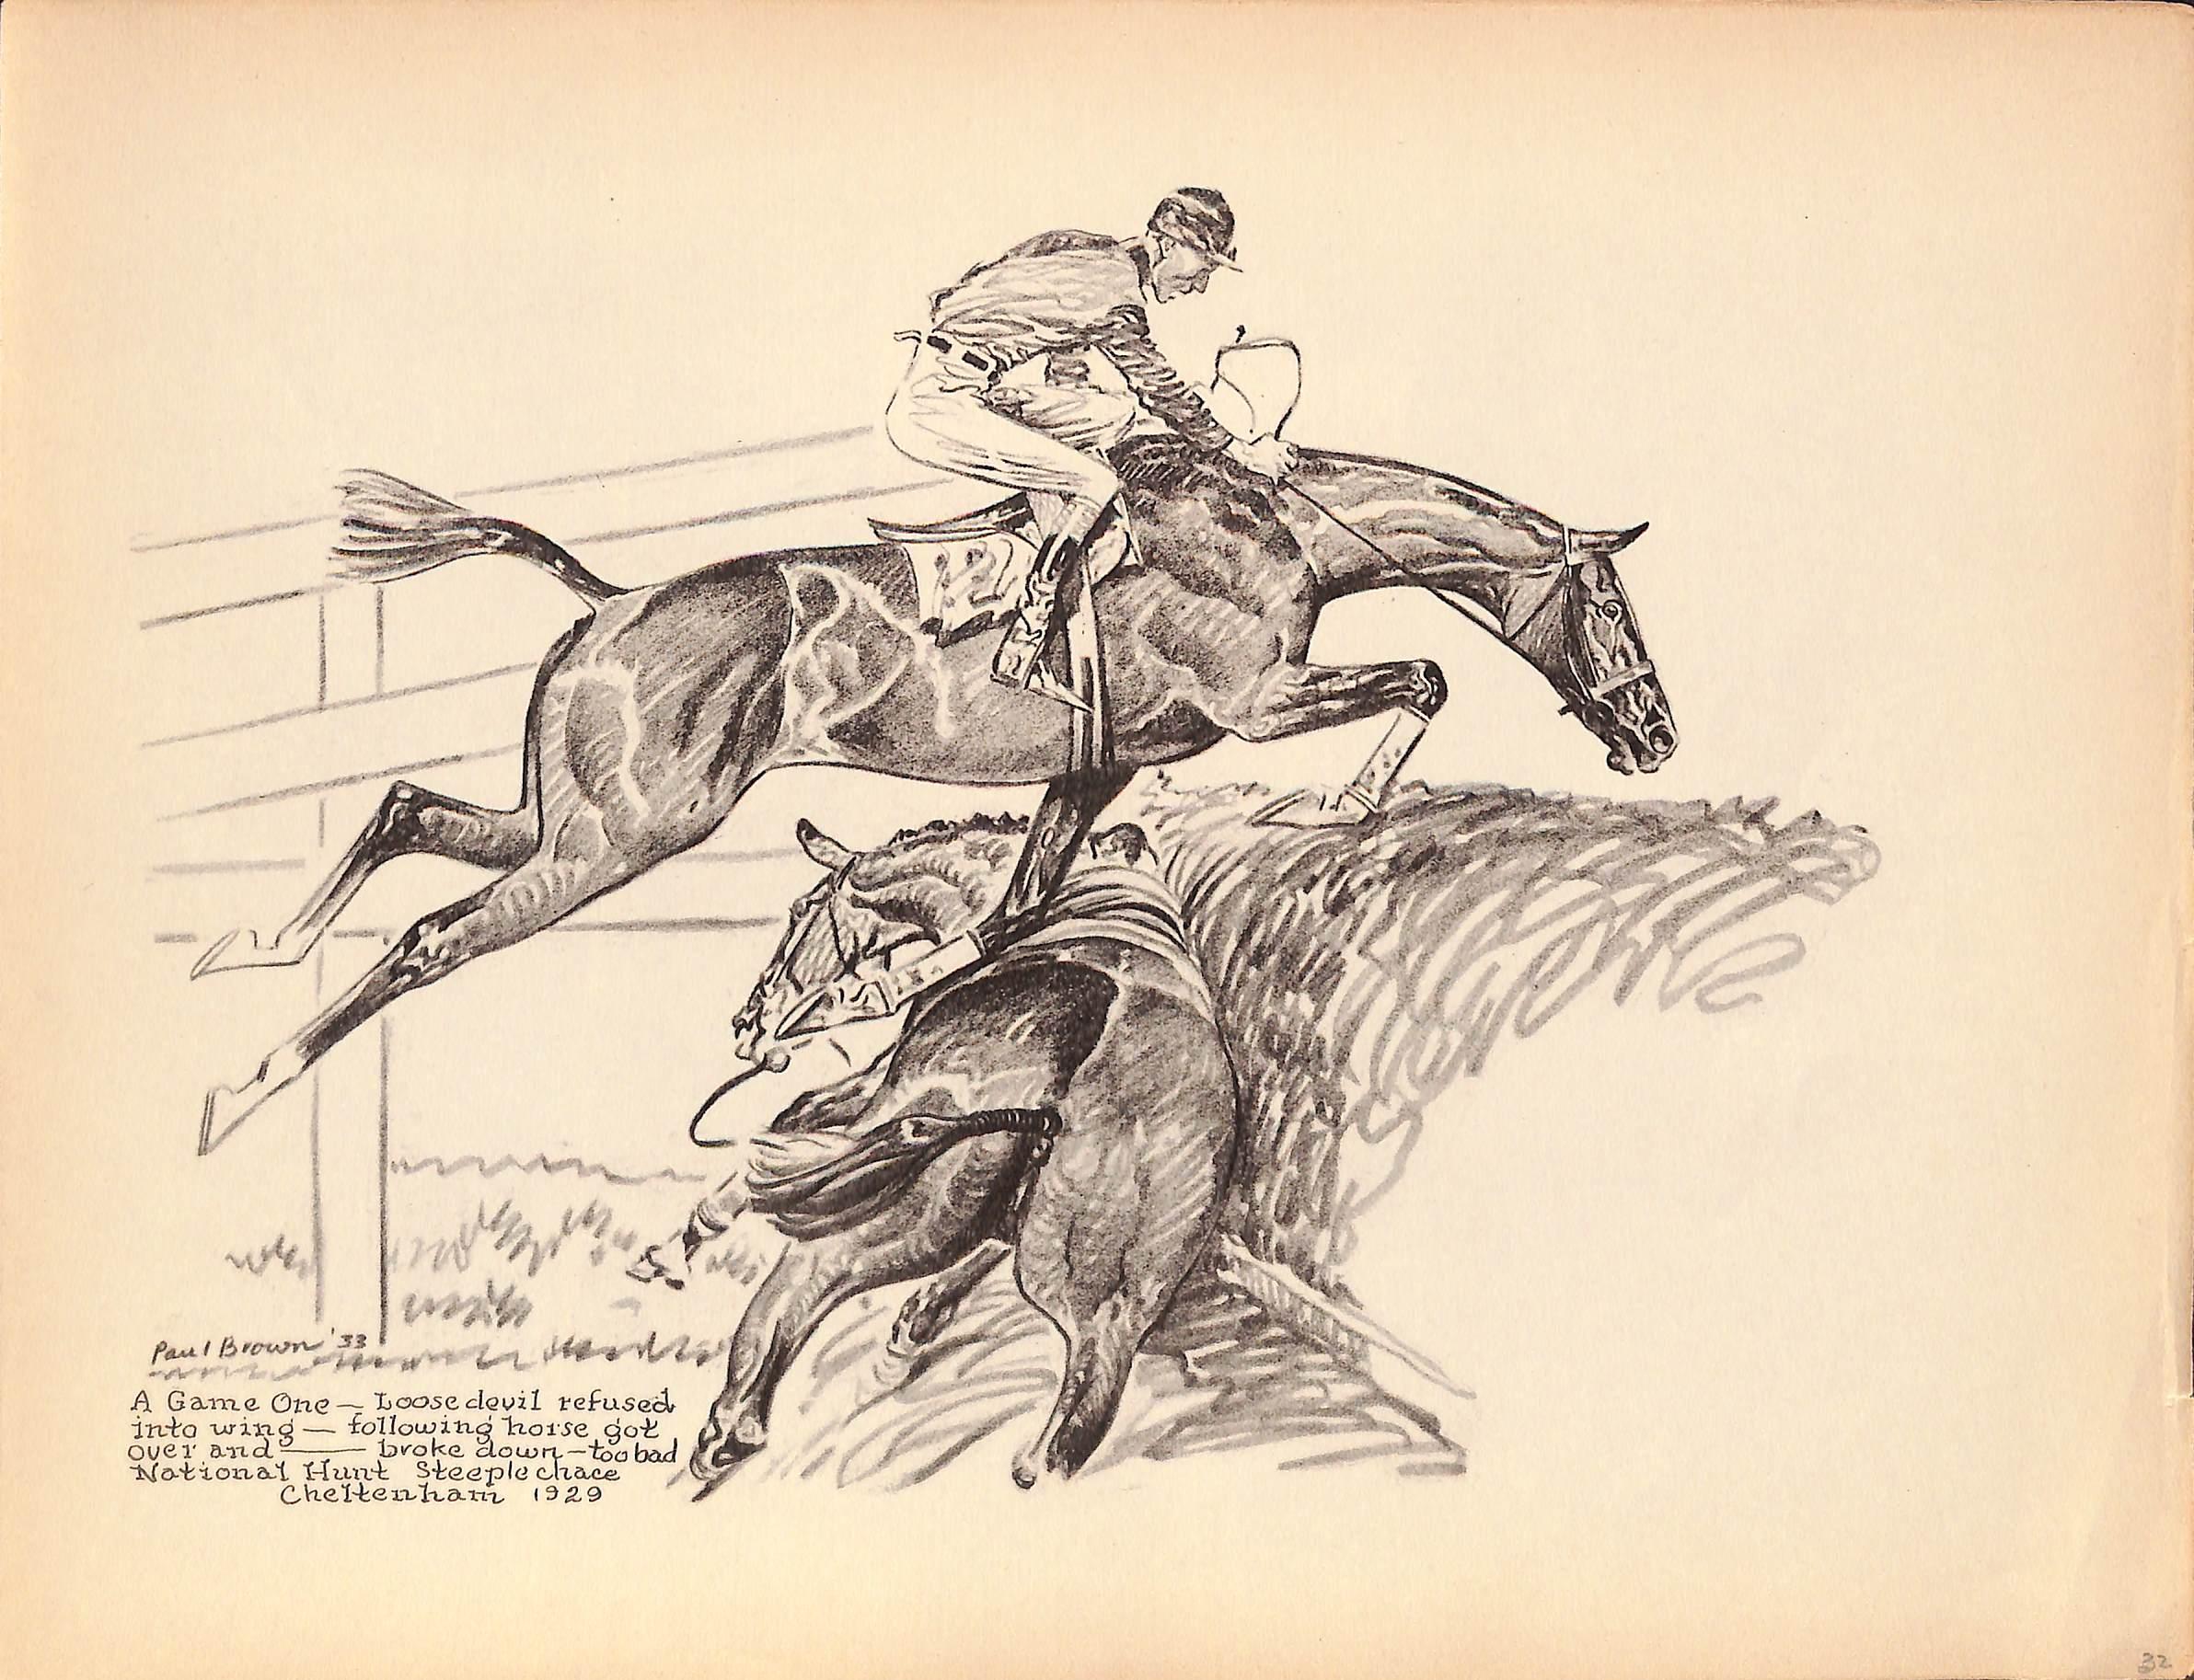 A Game One National Hunt Steeplechase Cheltenham 1929 - Art by Paul Desmond Brown